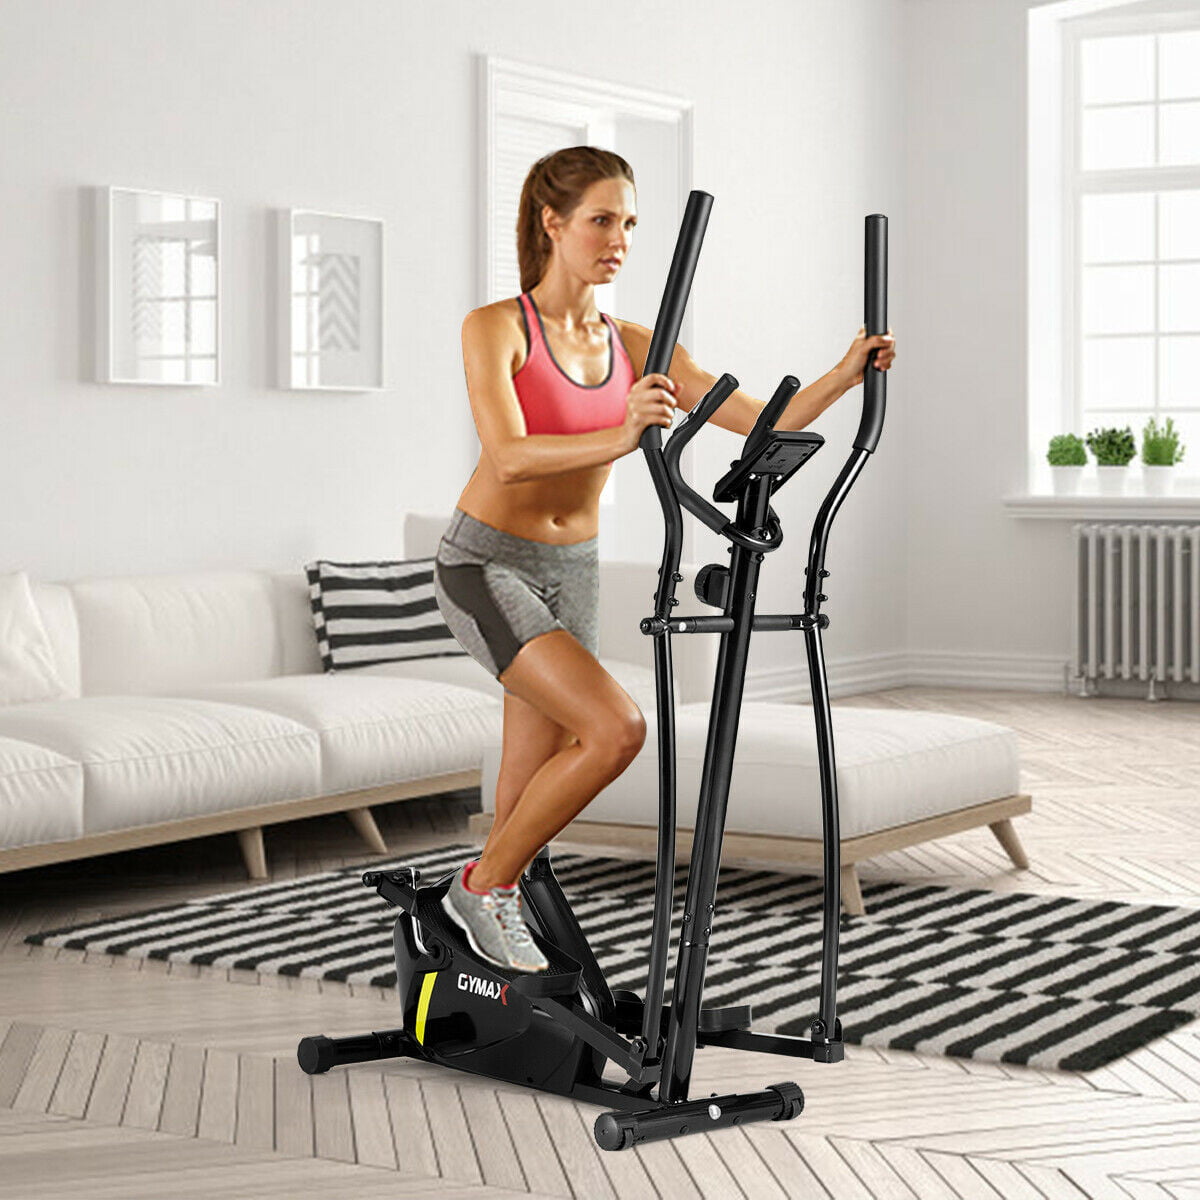 Details about   Brand new Magnetic Elliptical Machine Trainer for Home Gym Exercise help you fit 